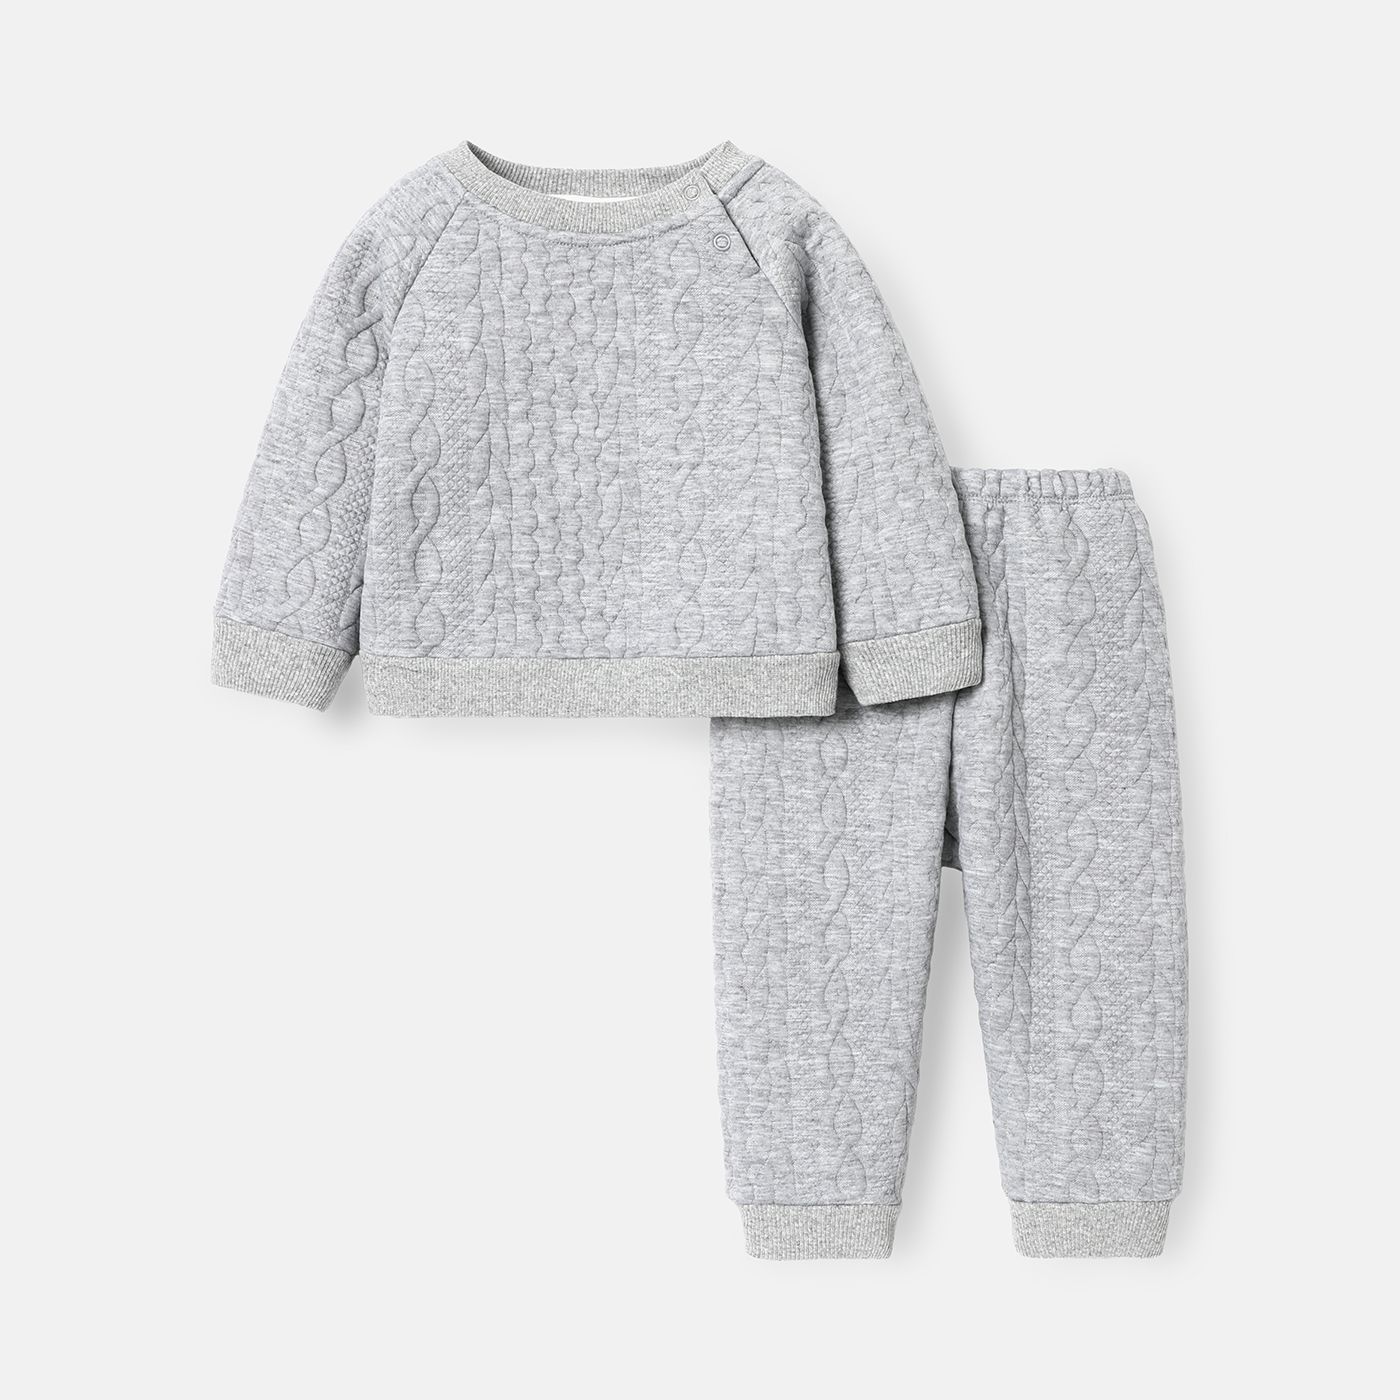 2pcs Baby Boy Solid Color Cable Knit Textured Long-sleeve Sweatshirt And Elasticized Pants Set